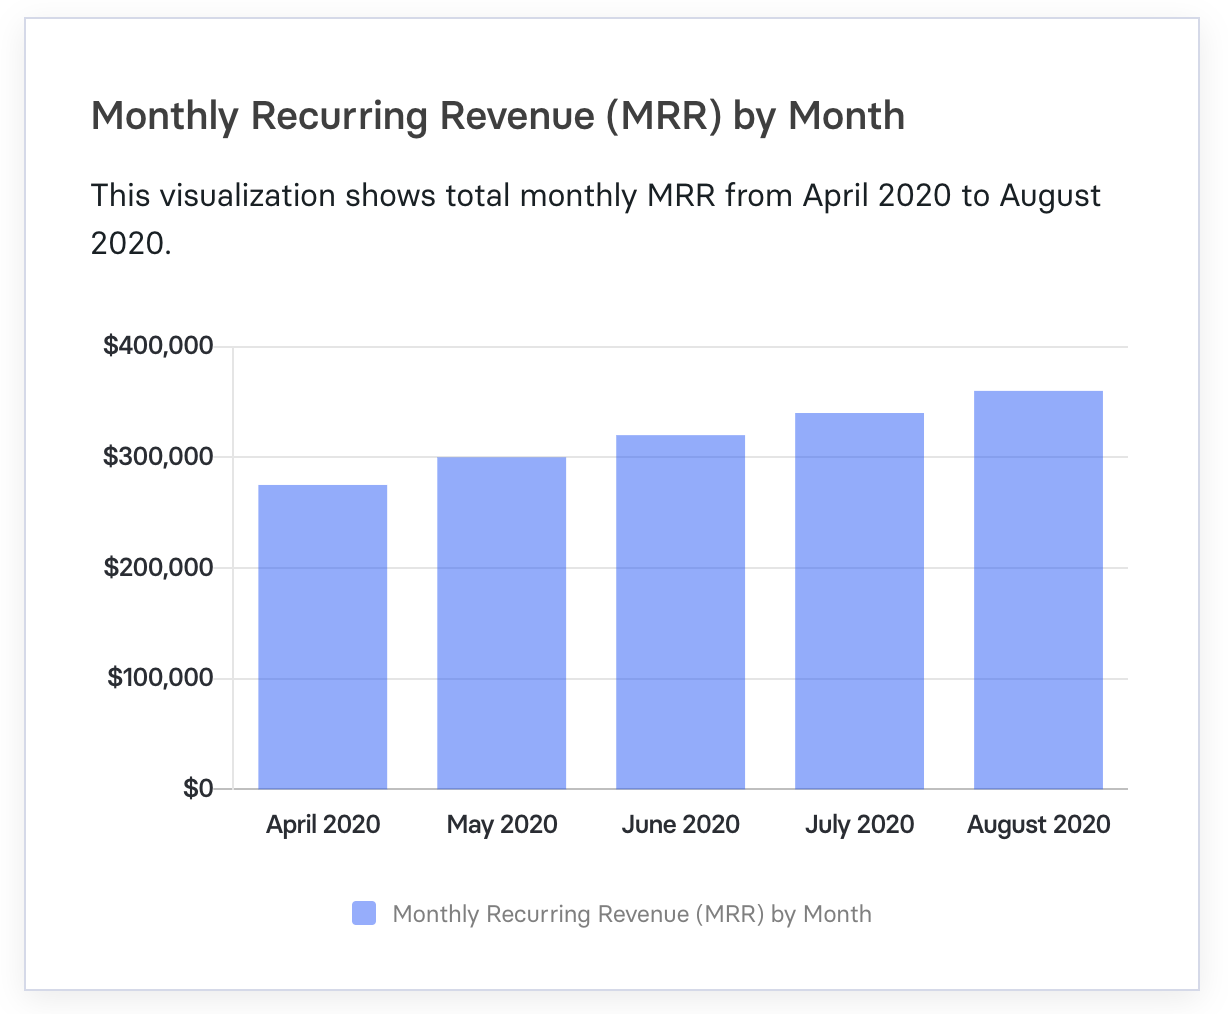 MRR by month chart in Mosaic